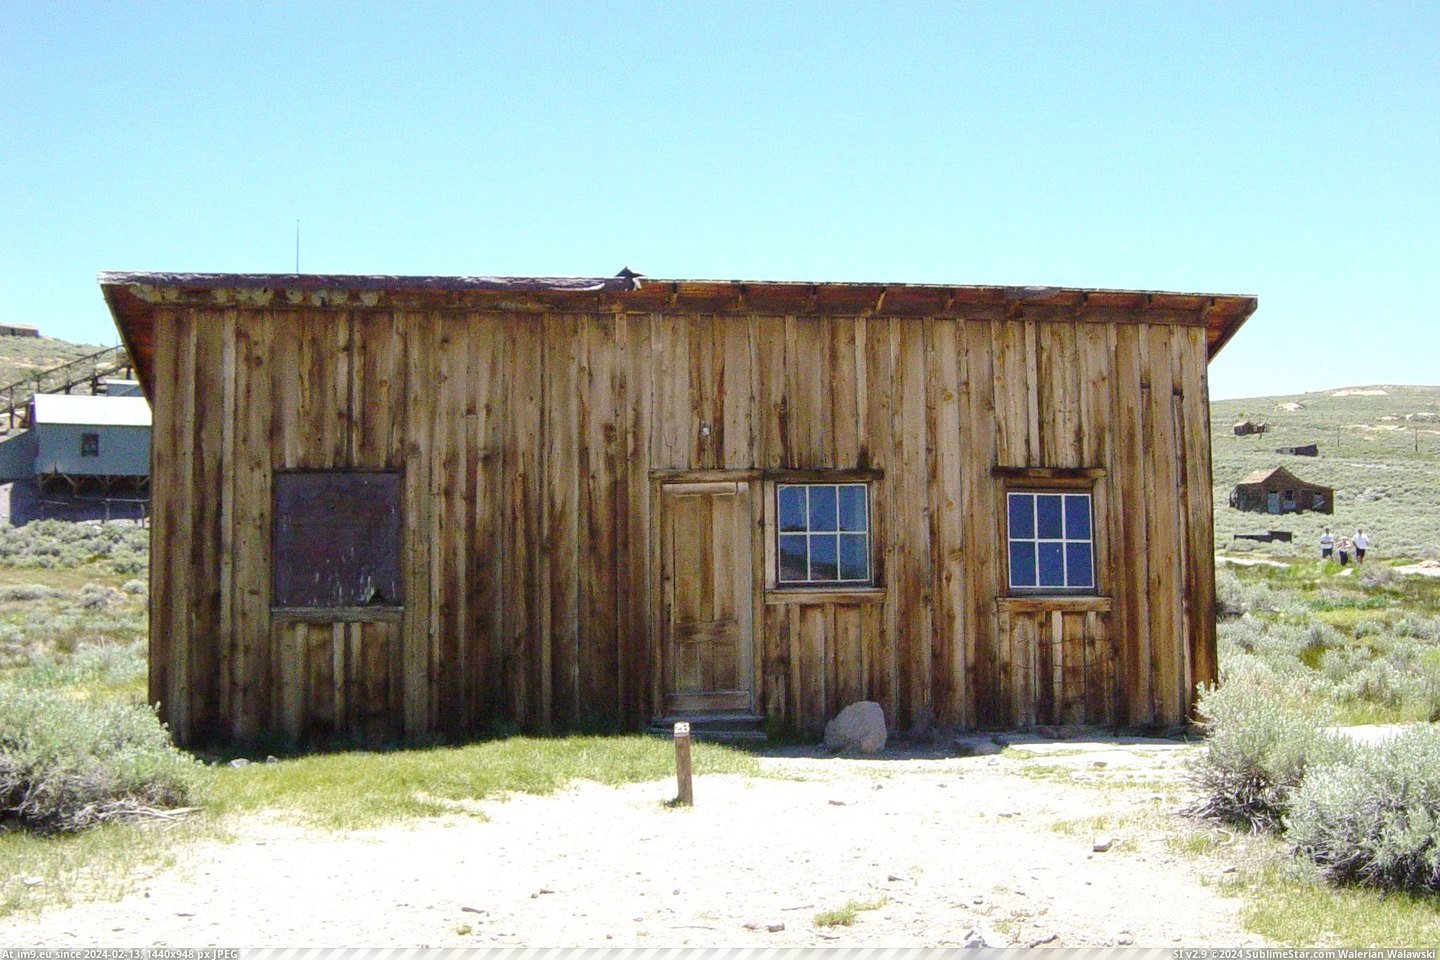 #California #Hall #Masonic #Site #Bodie Site Of Masonic Hall In Bodie, California Pic. (Изображение из альбом Bodie - a ghost town in Eastern California))